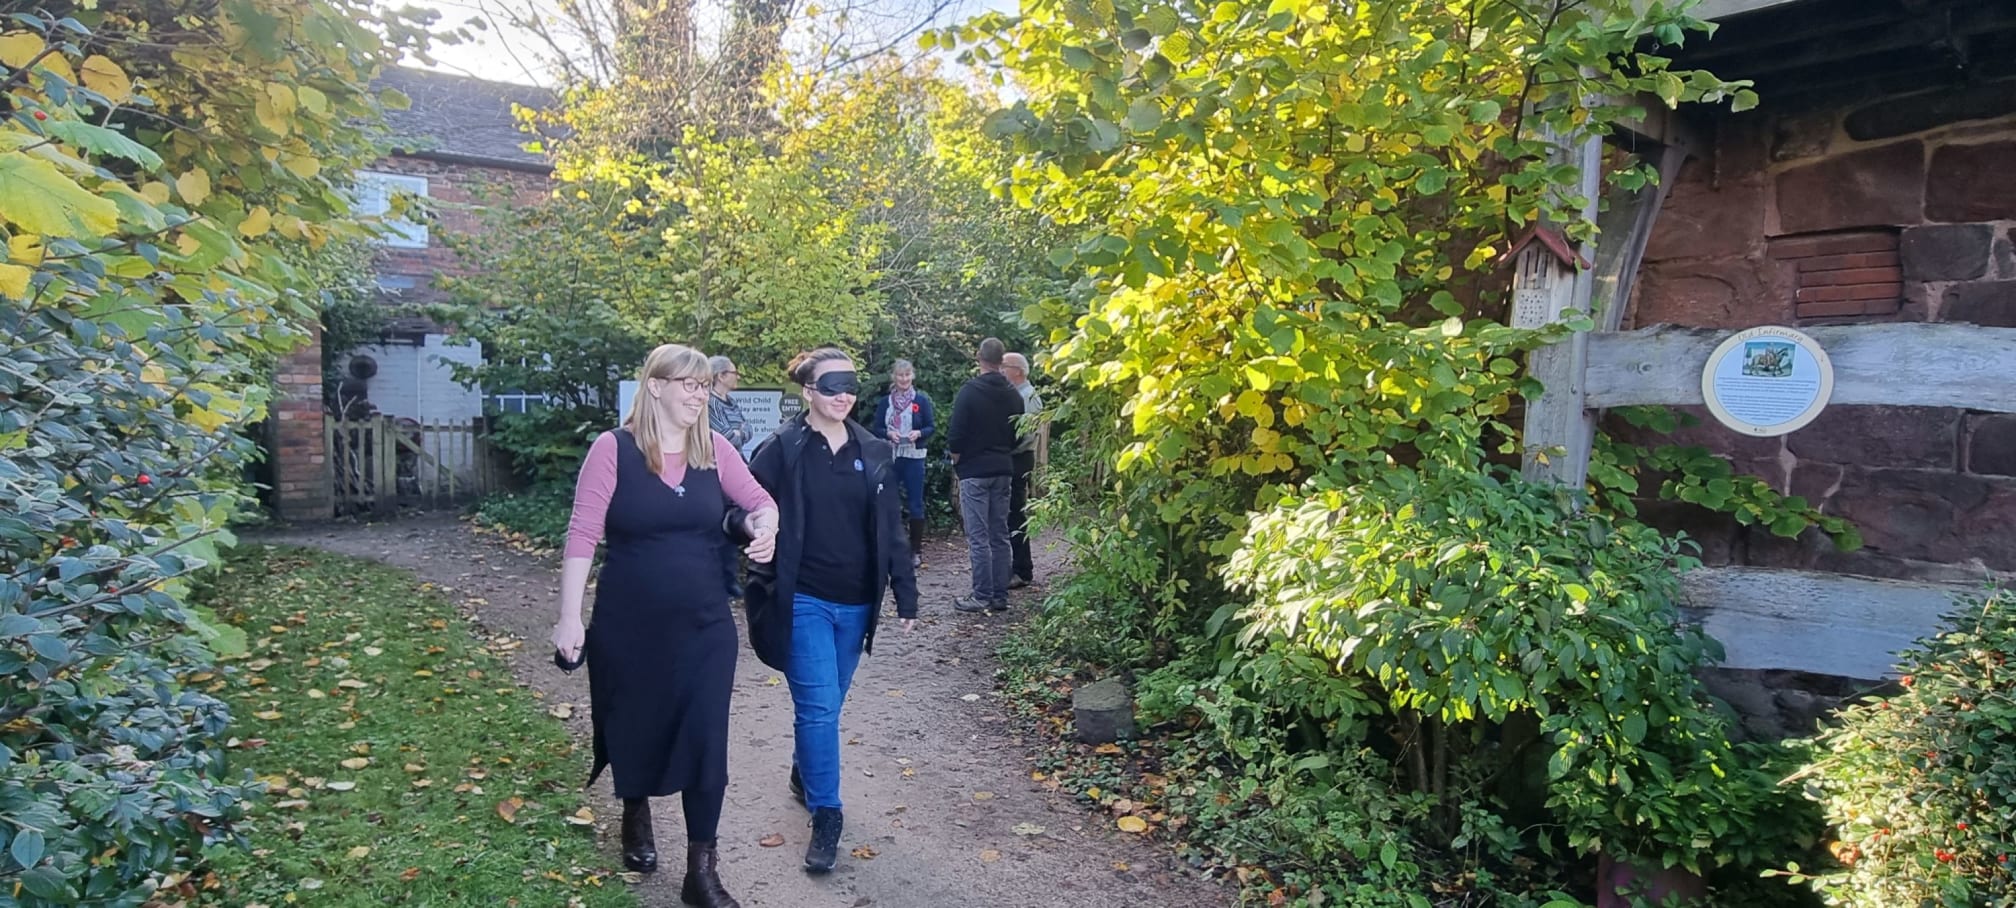 People experiencing visual impairments and sight loss being guided around a garden